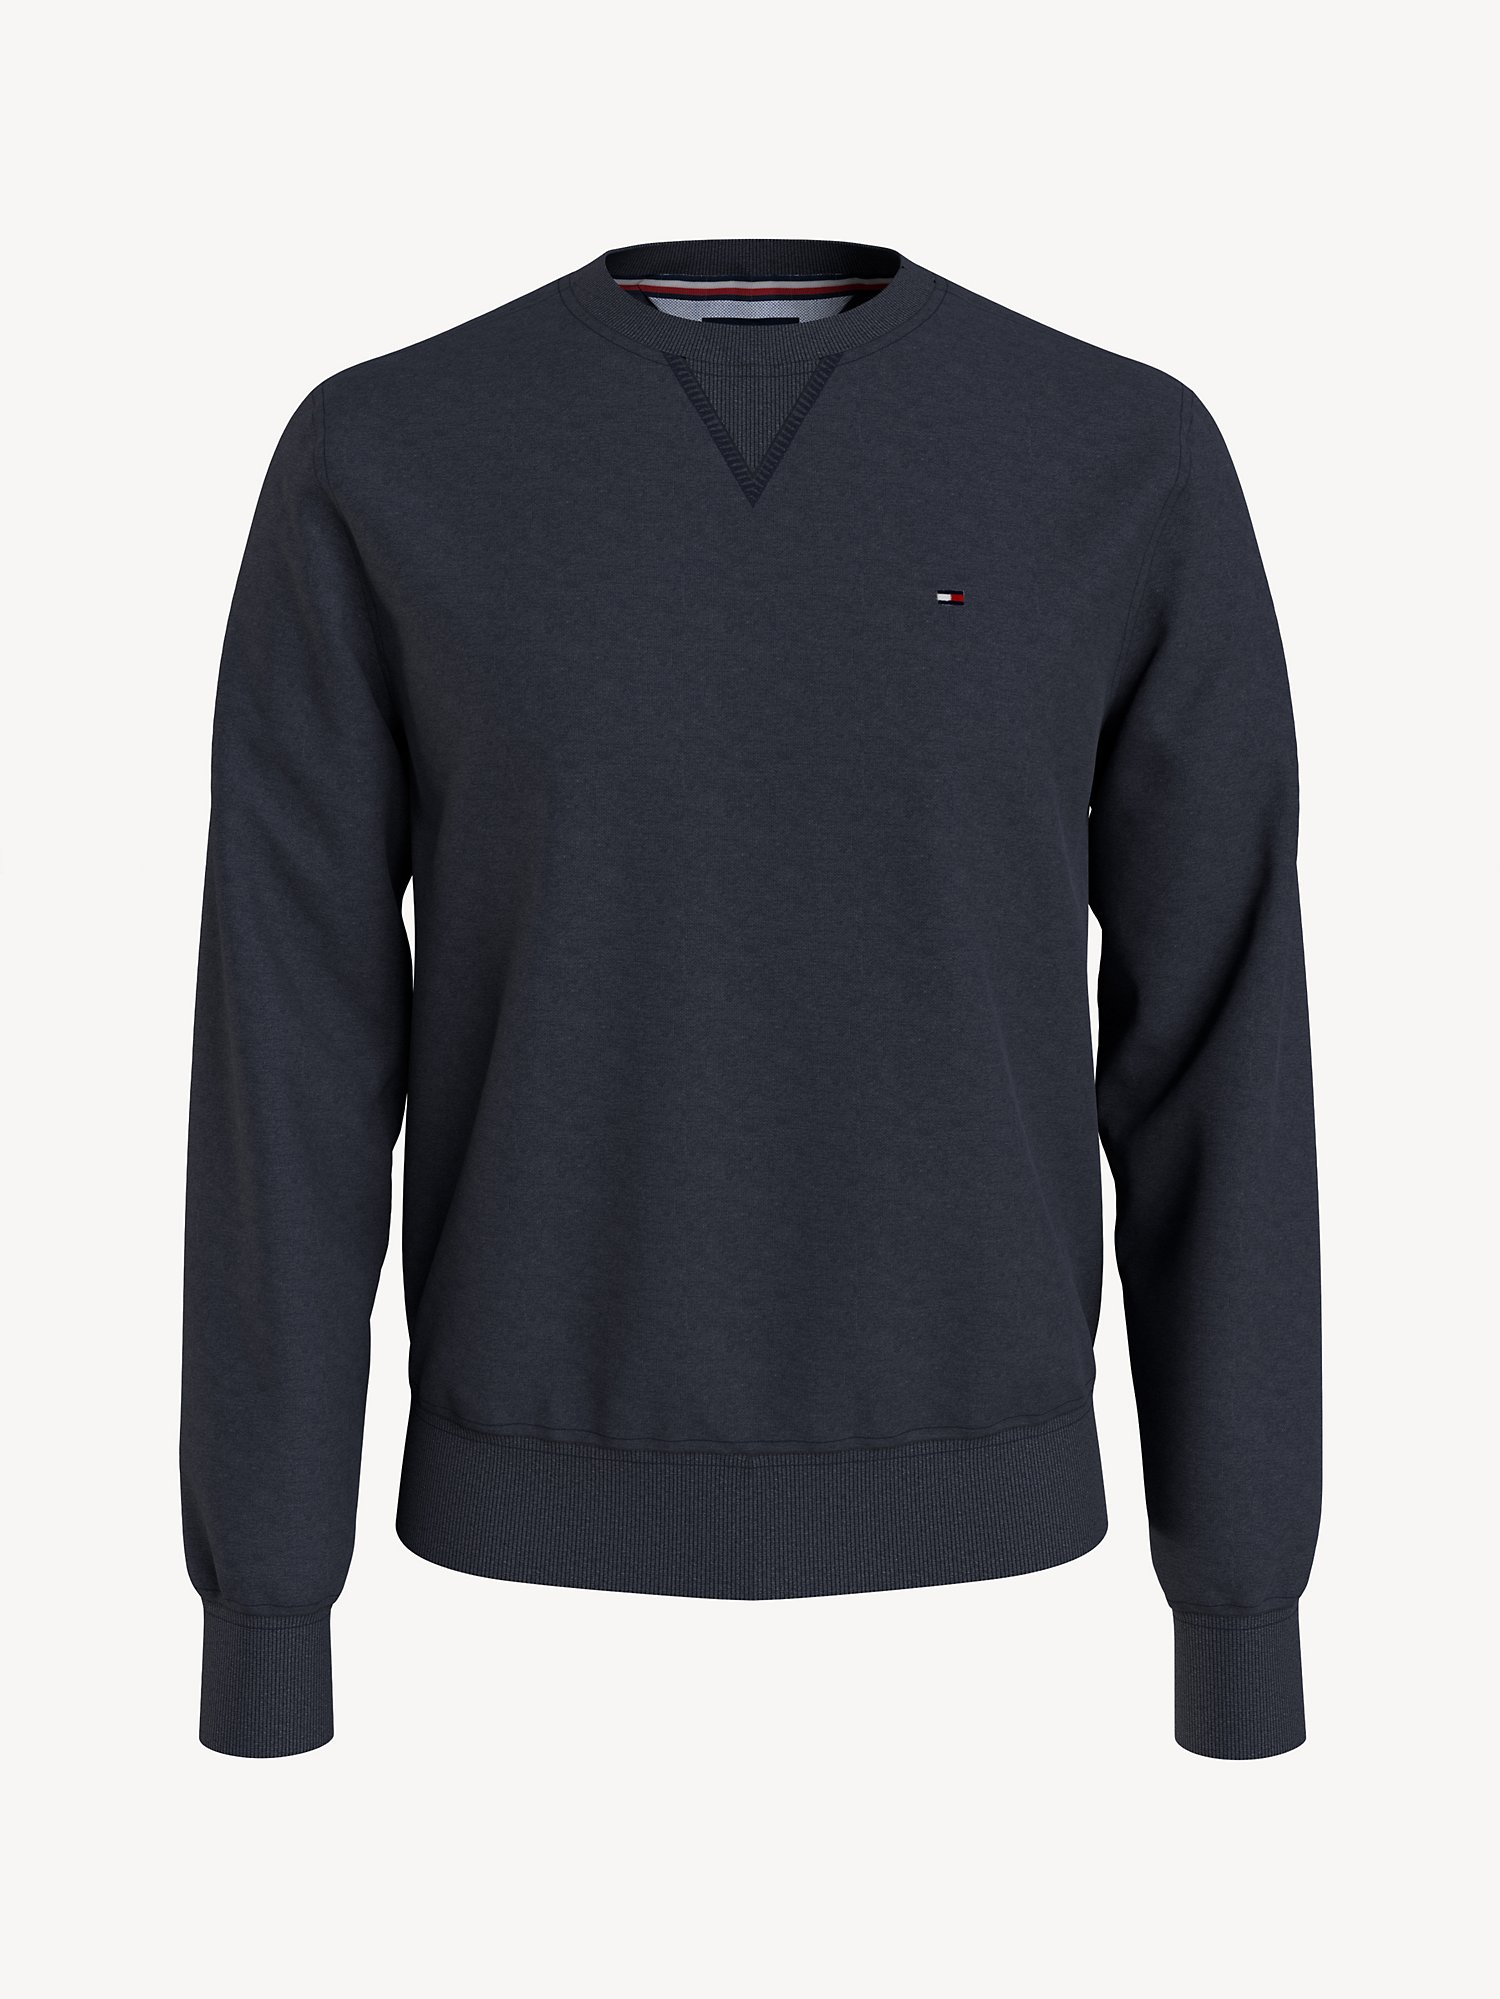 Tommy Tommy Hilfiger Crew Neck Sweater